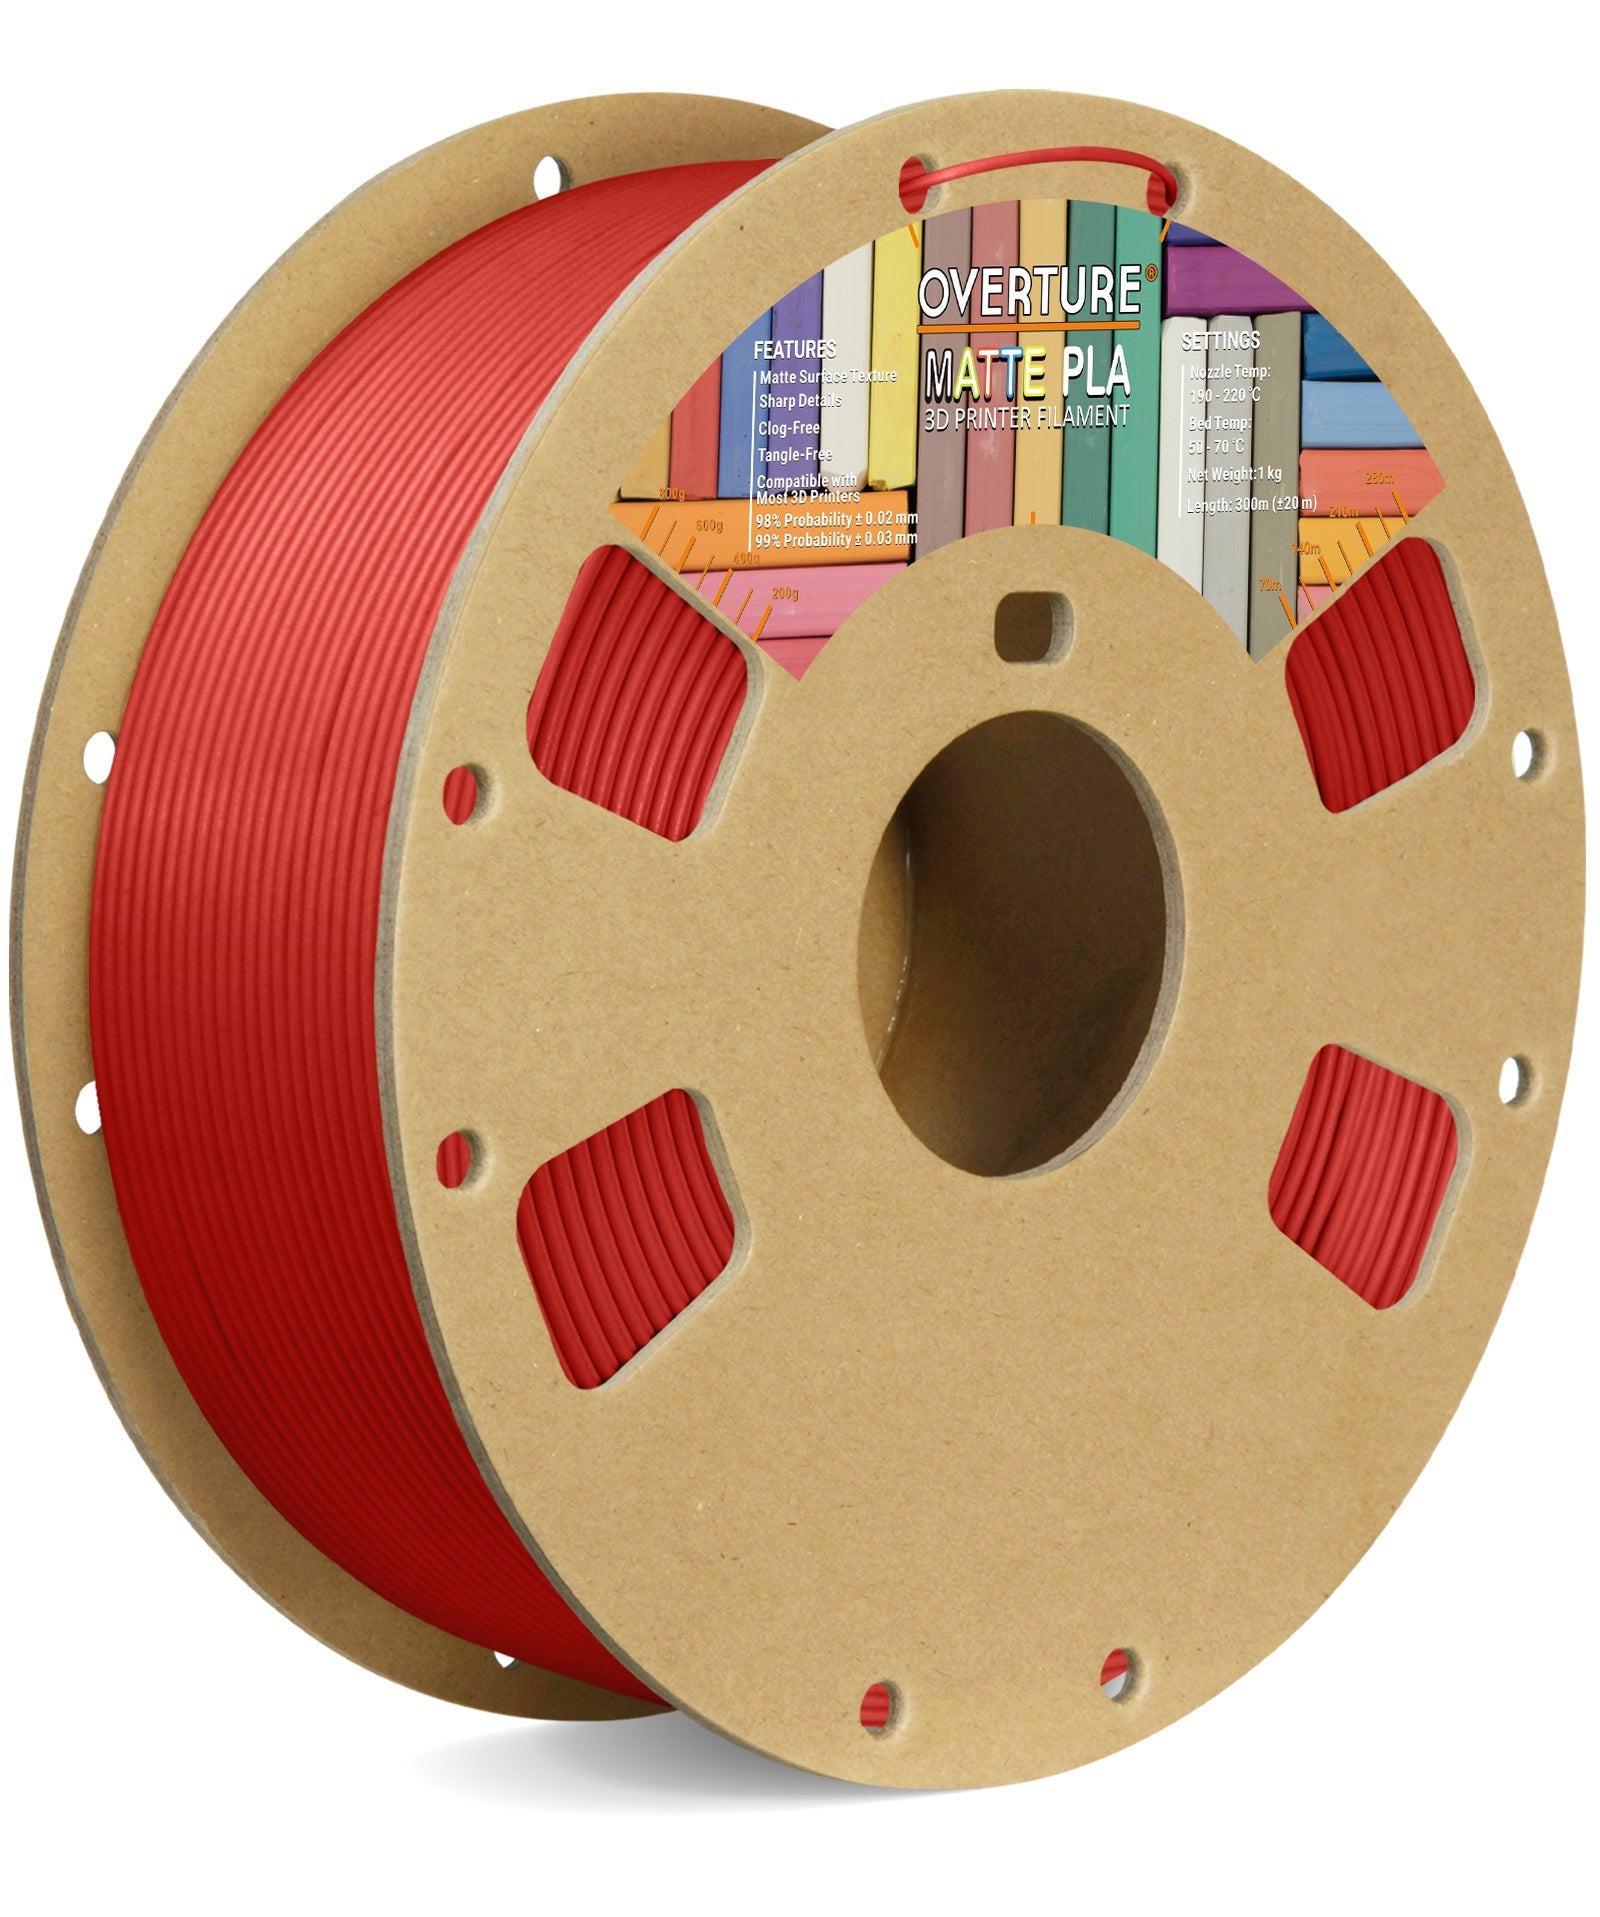 Creality PLA Pro(PLA+) 3D Printer Filament 1.75mm, PLA Plus Red, Toughness  Upgraded Dimensional Accuracy +/- 0.03mm, 1kg Spool(2.2lbs) Ender PLA+